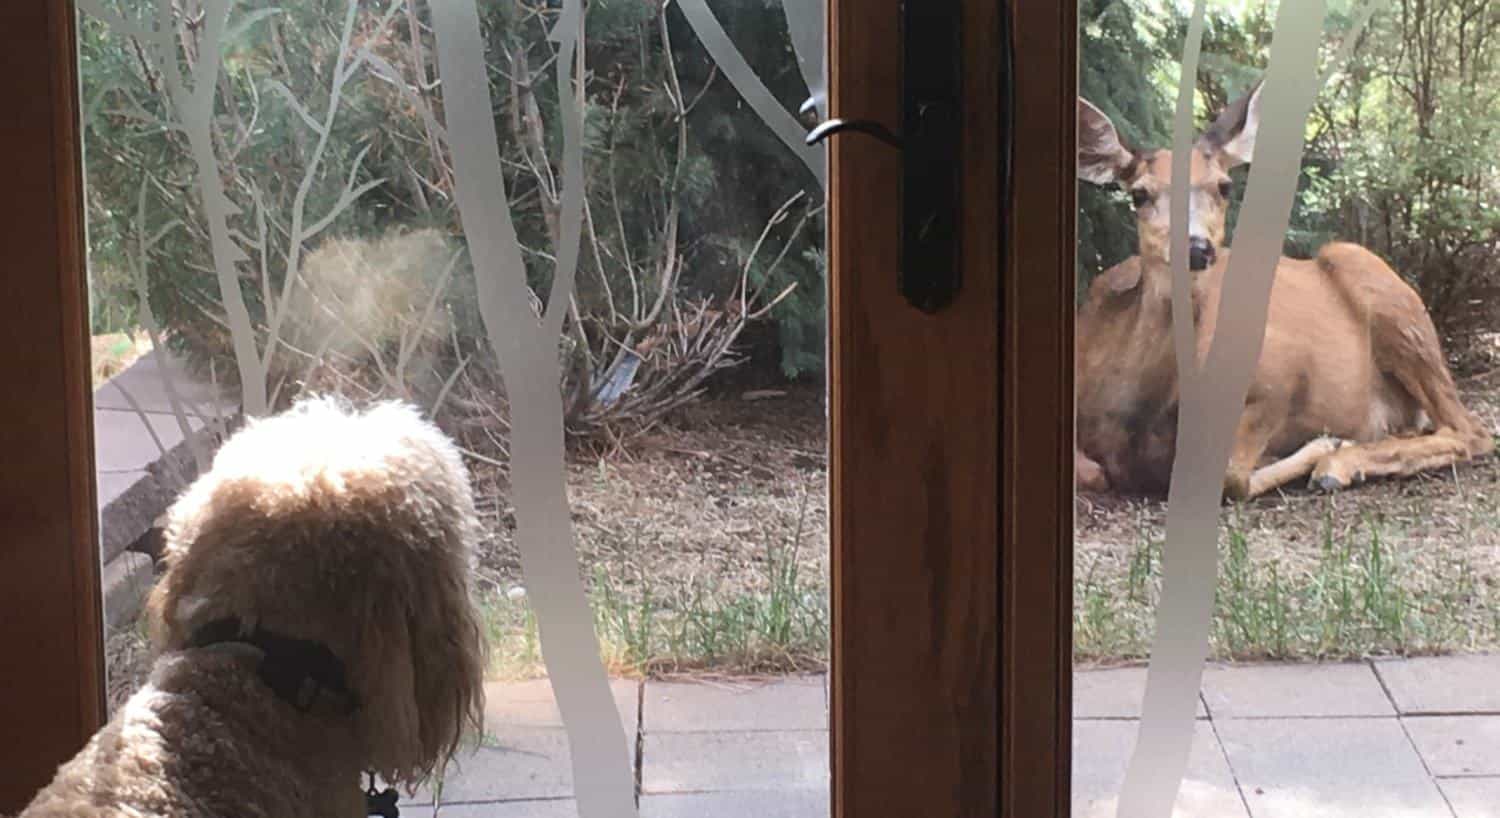 Shaggy white dog looking through glass doors at a doe sitting in grass near patio outside